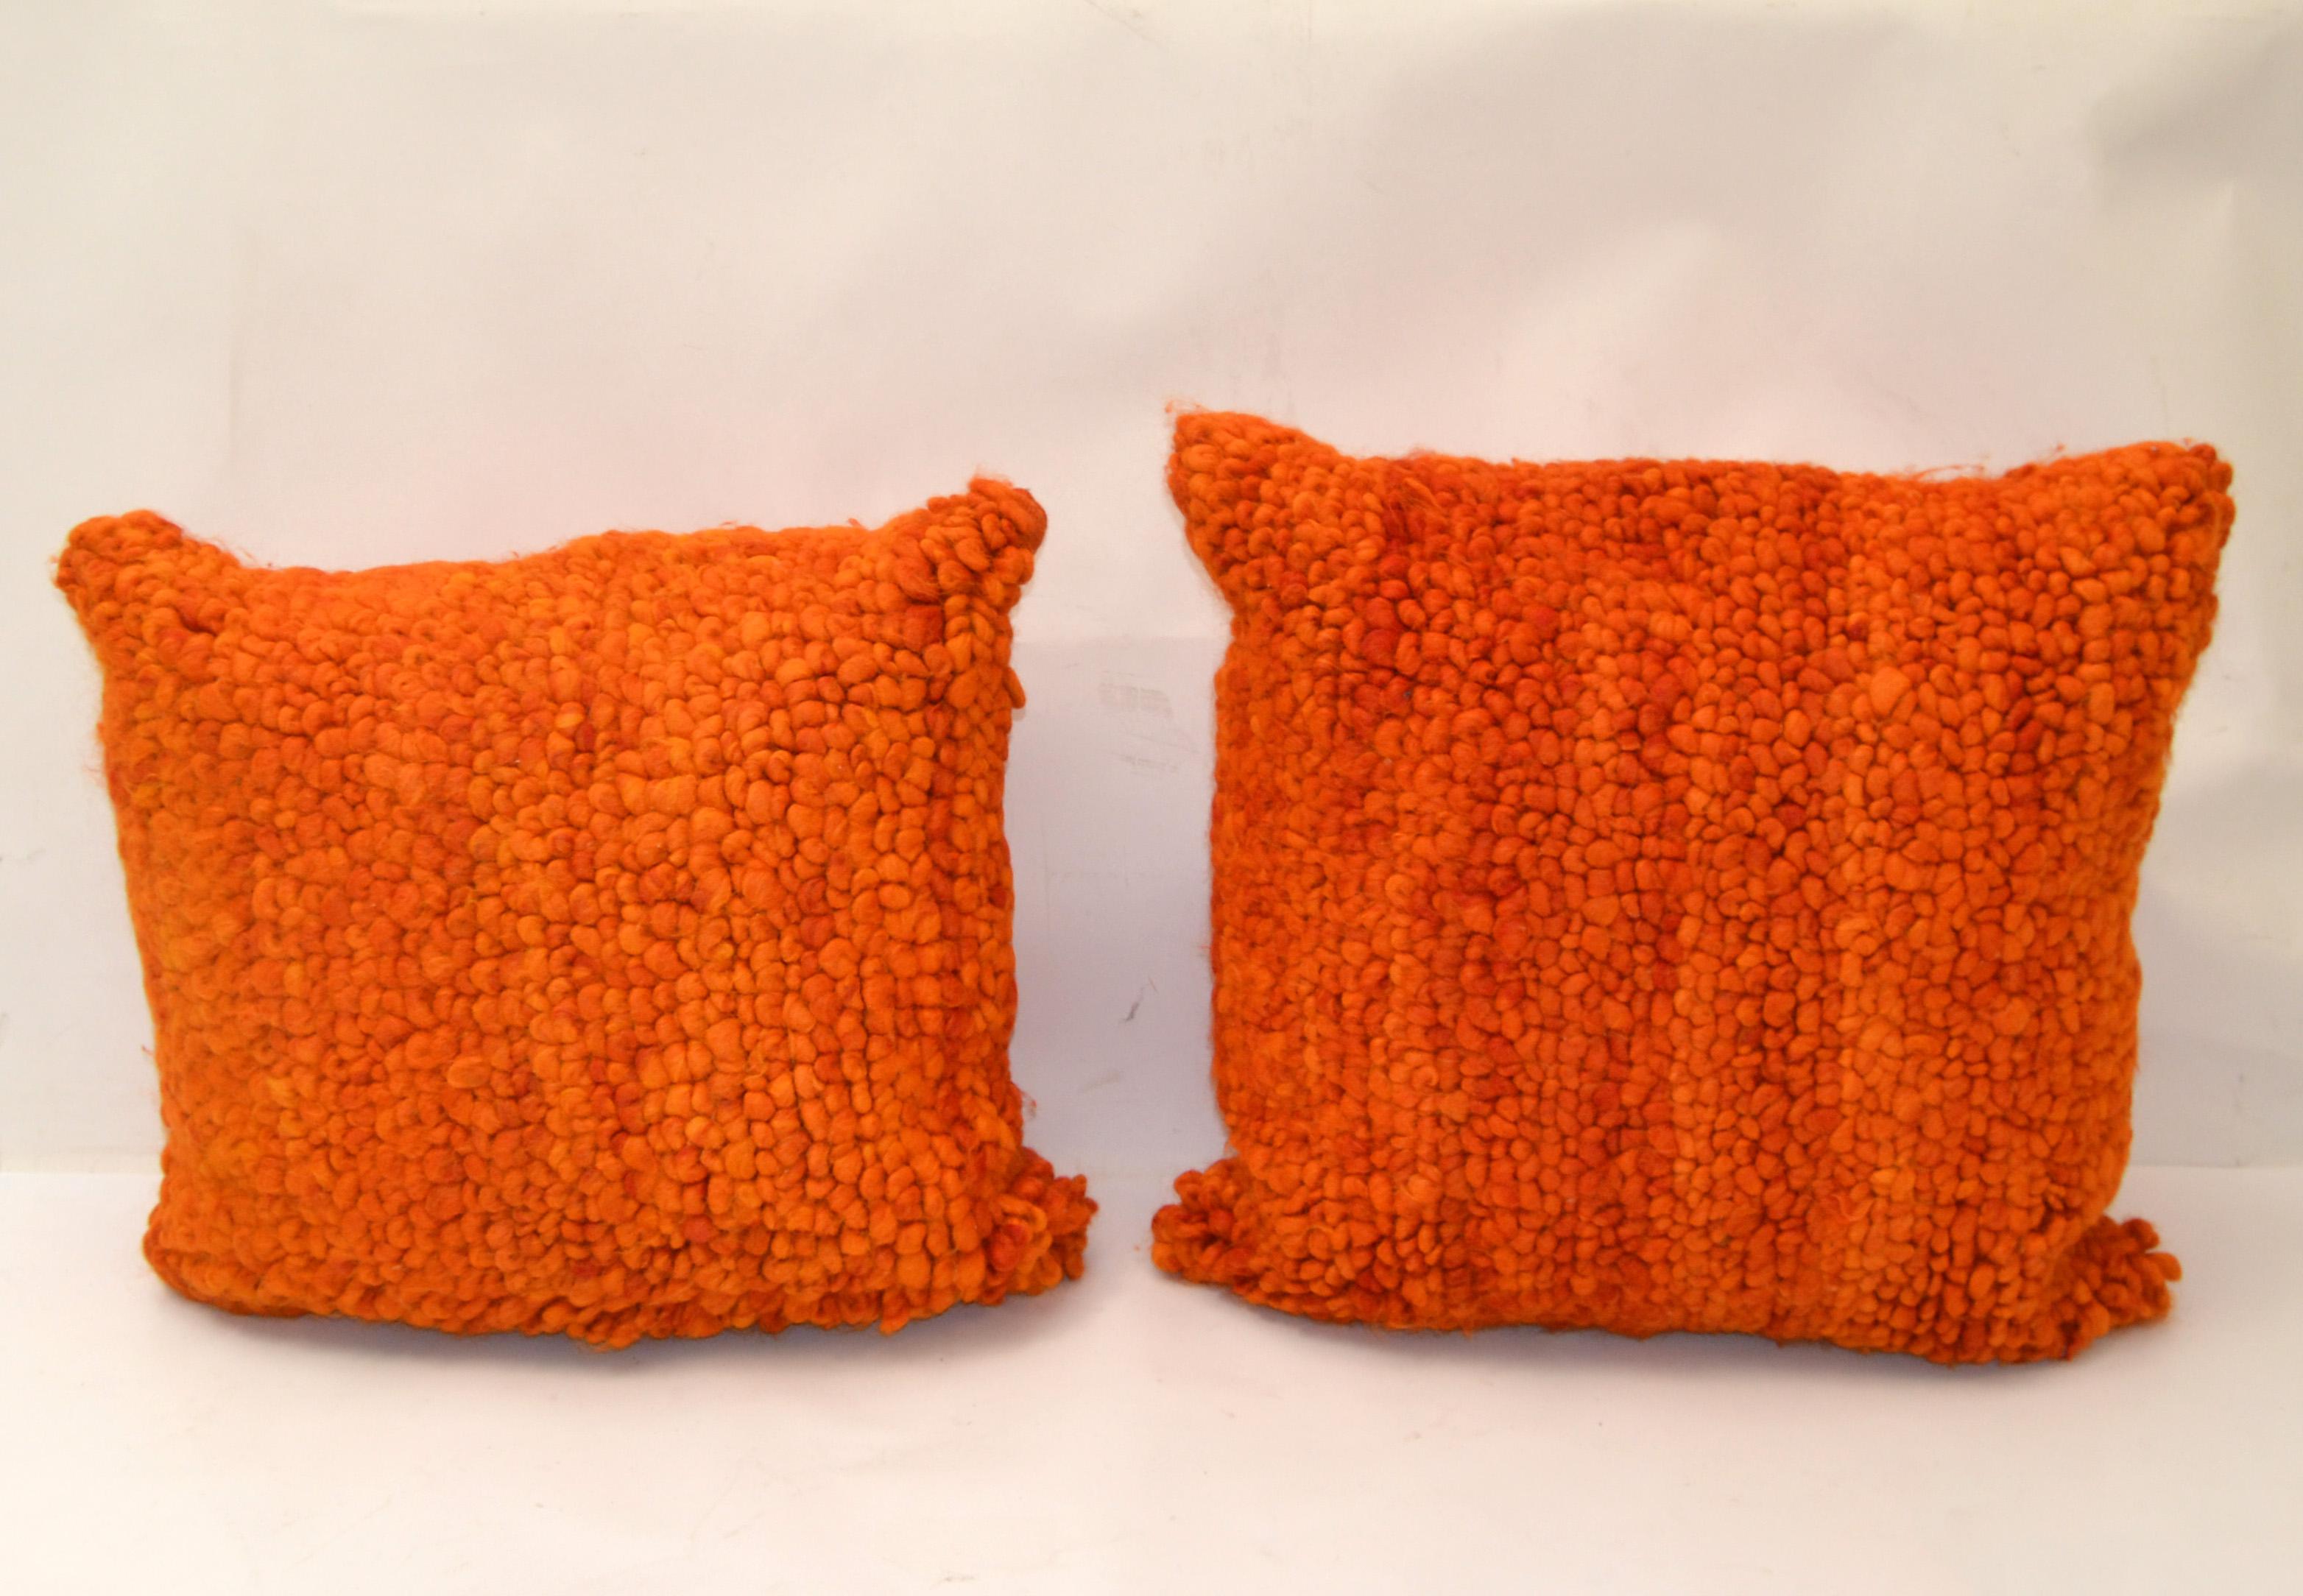 Set of 2 'My Primaloft Pillow' in Orange Cotton by Jonathan Adler made for Bloomingdale's.
Complete pillows, filled with flair down & closure is the classic invisible zipper. 
Both pillows come in the original Plastic cover and are marked inside